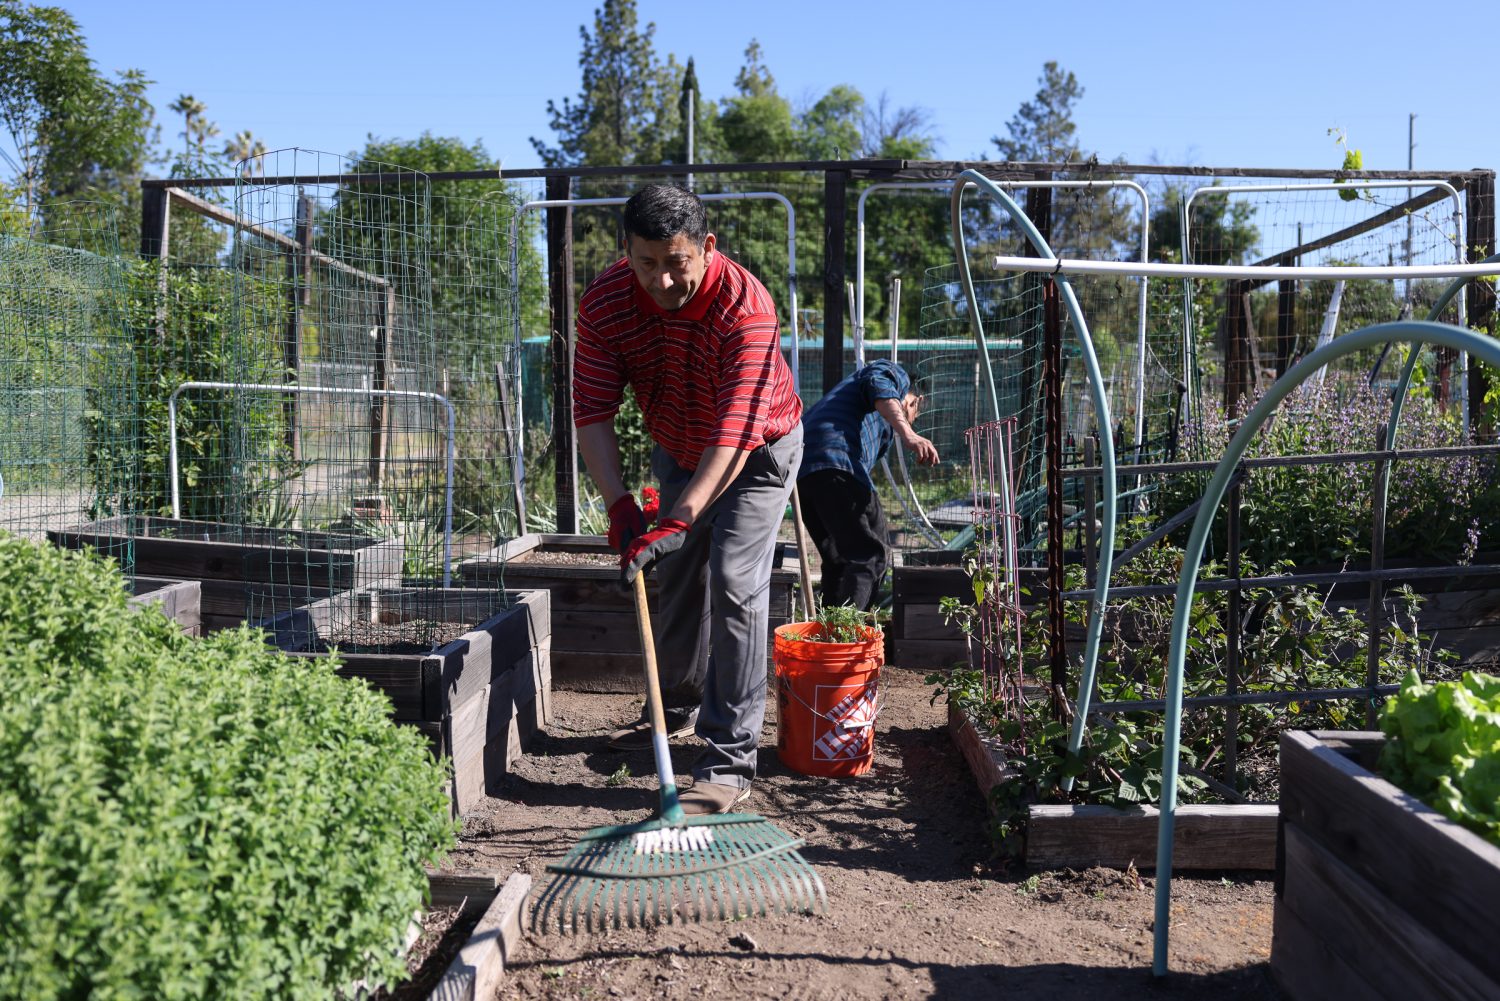 A Salvation Army community garden plot brings renewal for men in recovery